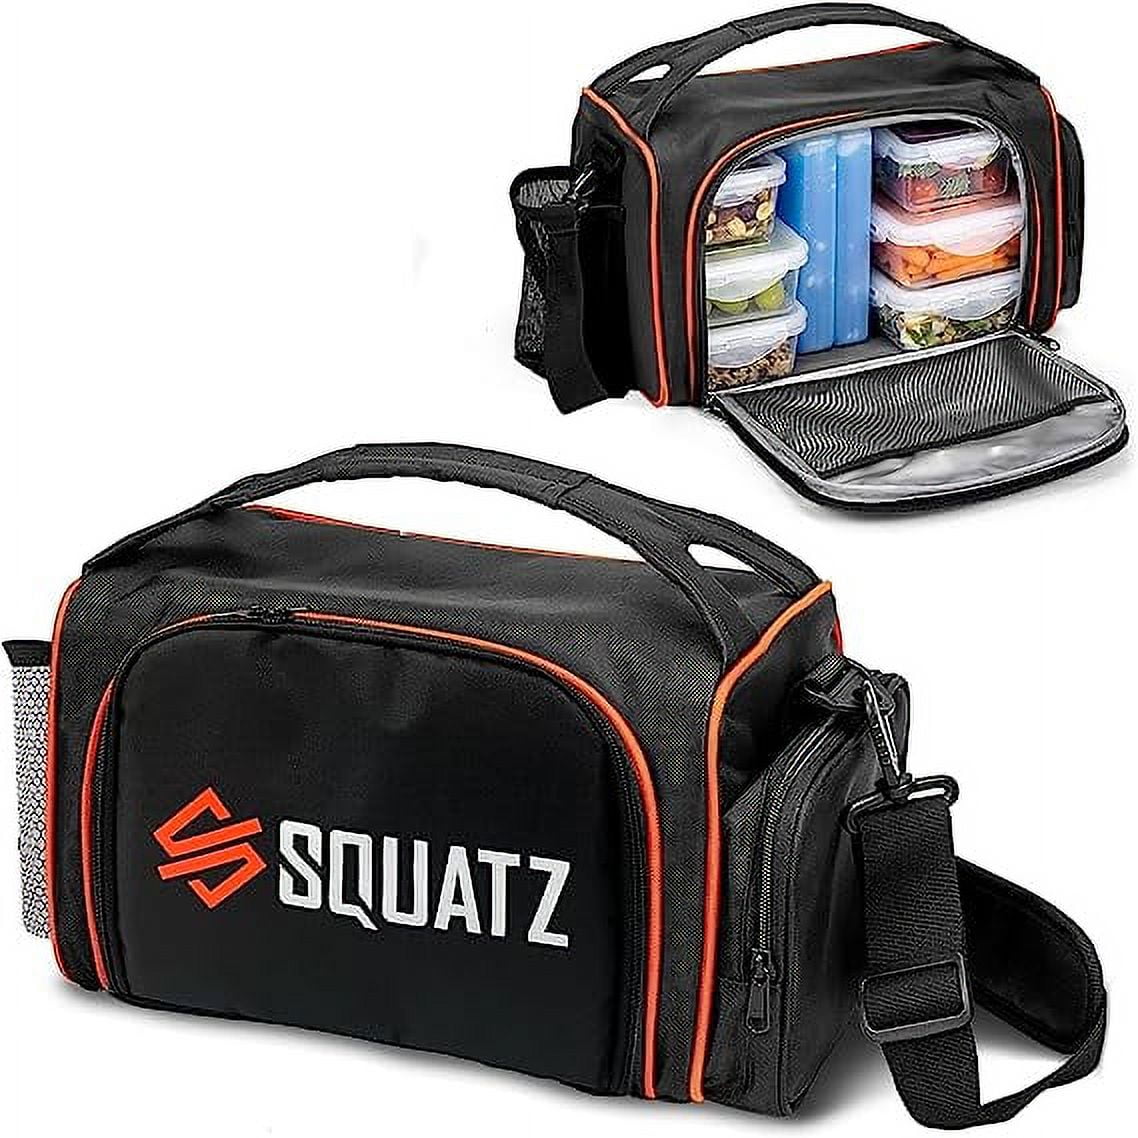 Prep Squatz Insulation Lbs Insulated 13 Duty Maximum Capacity Bag Lunch Heavy Double Meal Container